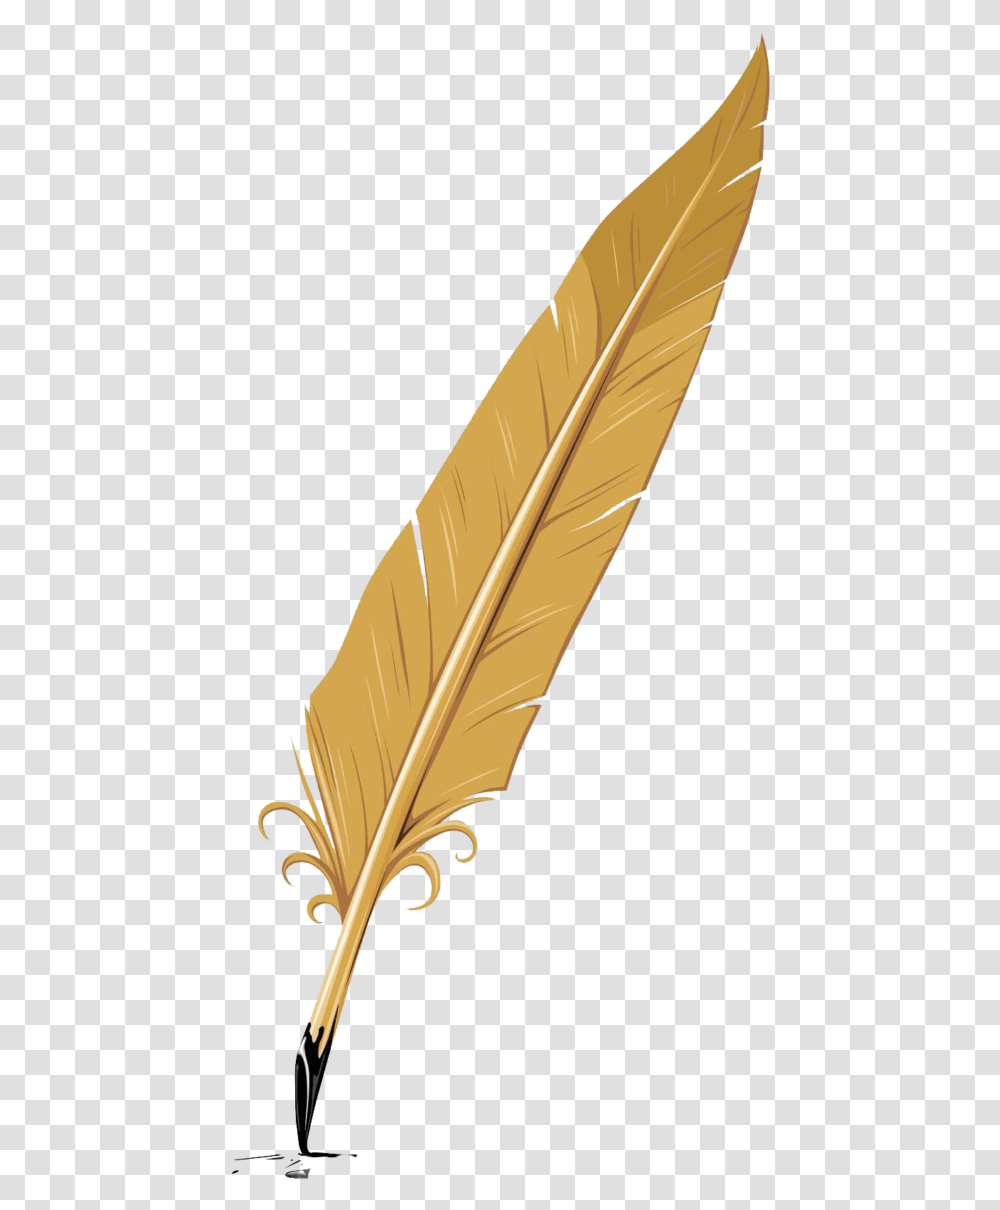 Writing Feather Feather Pen, Bottle, Ink Bottle Transparent Png